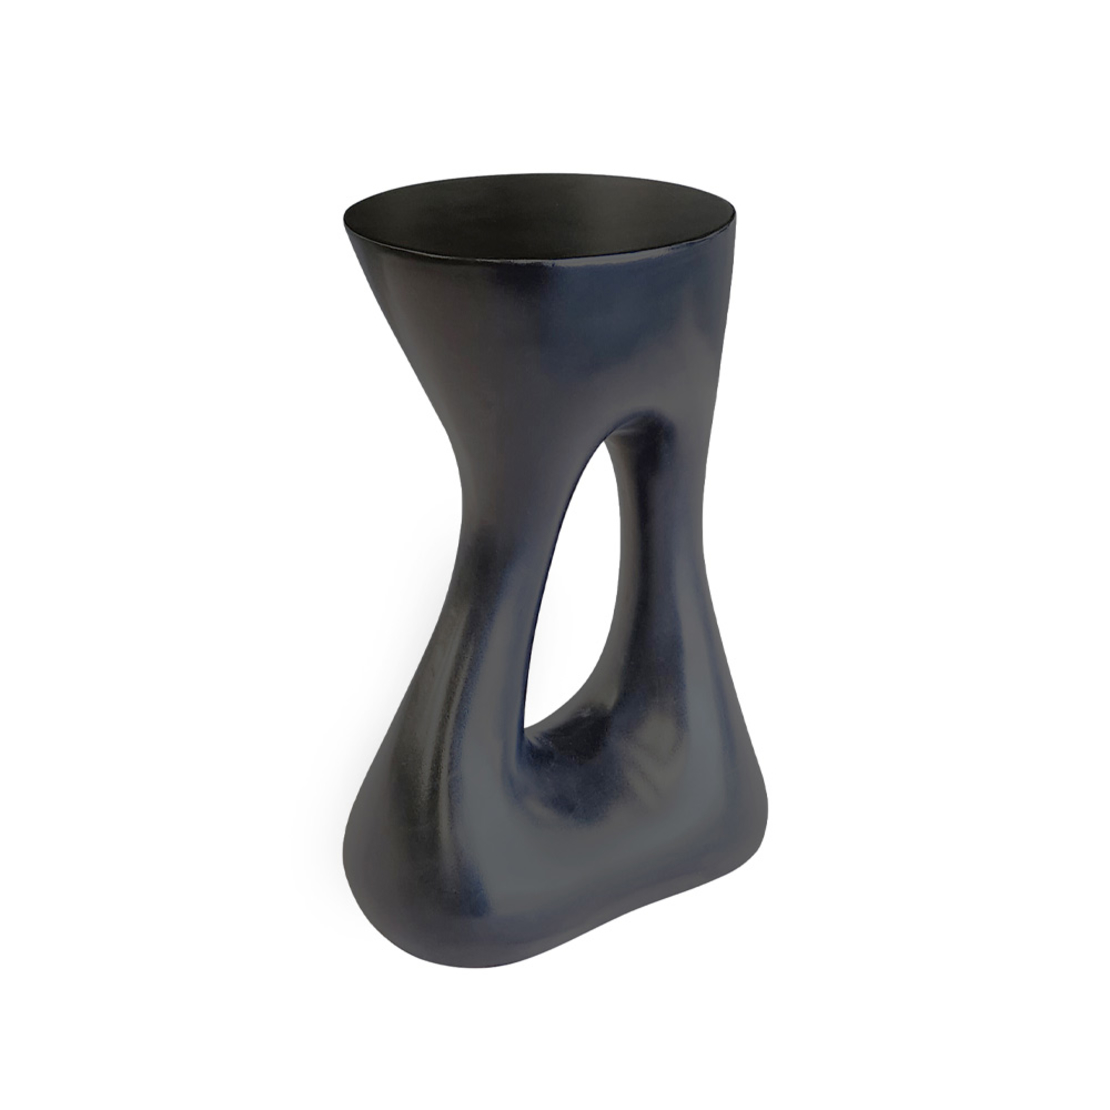 ABSTRACT SIDE TABLE CEMENT BLACK 38x28xH56cm VN